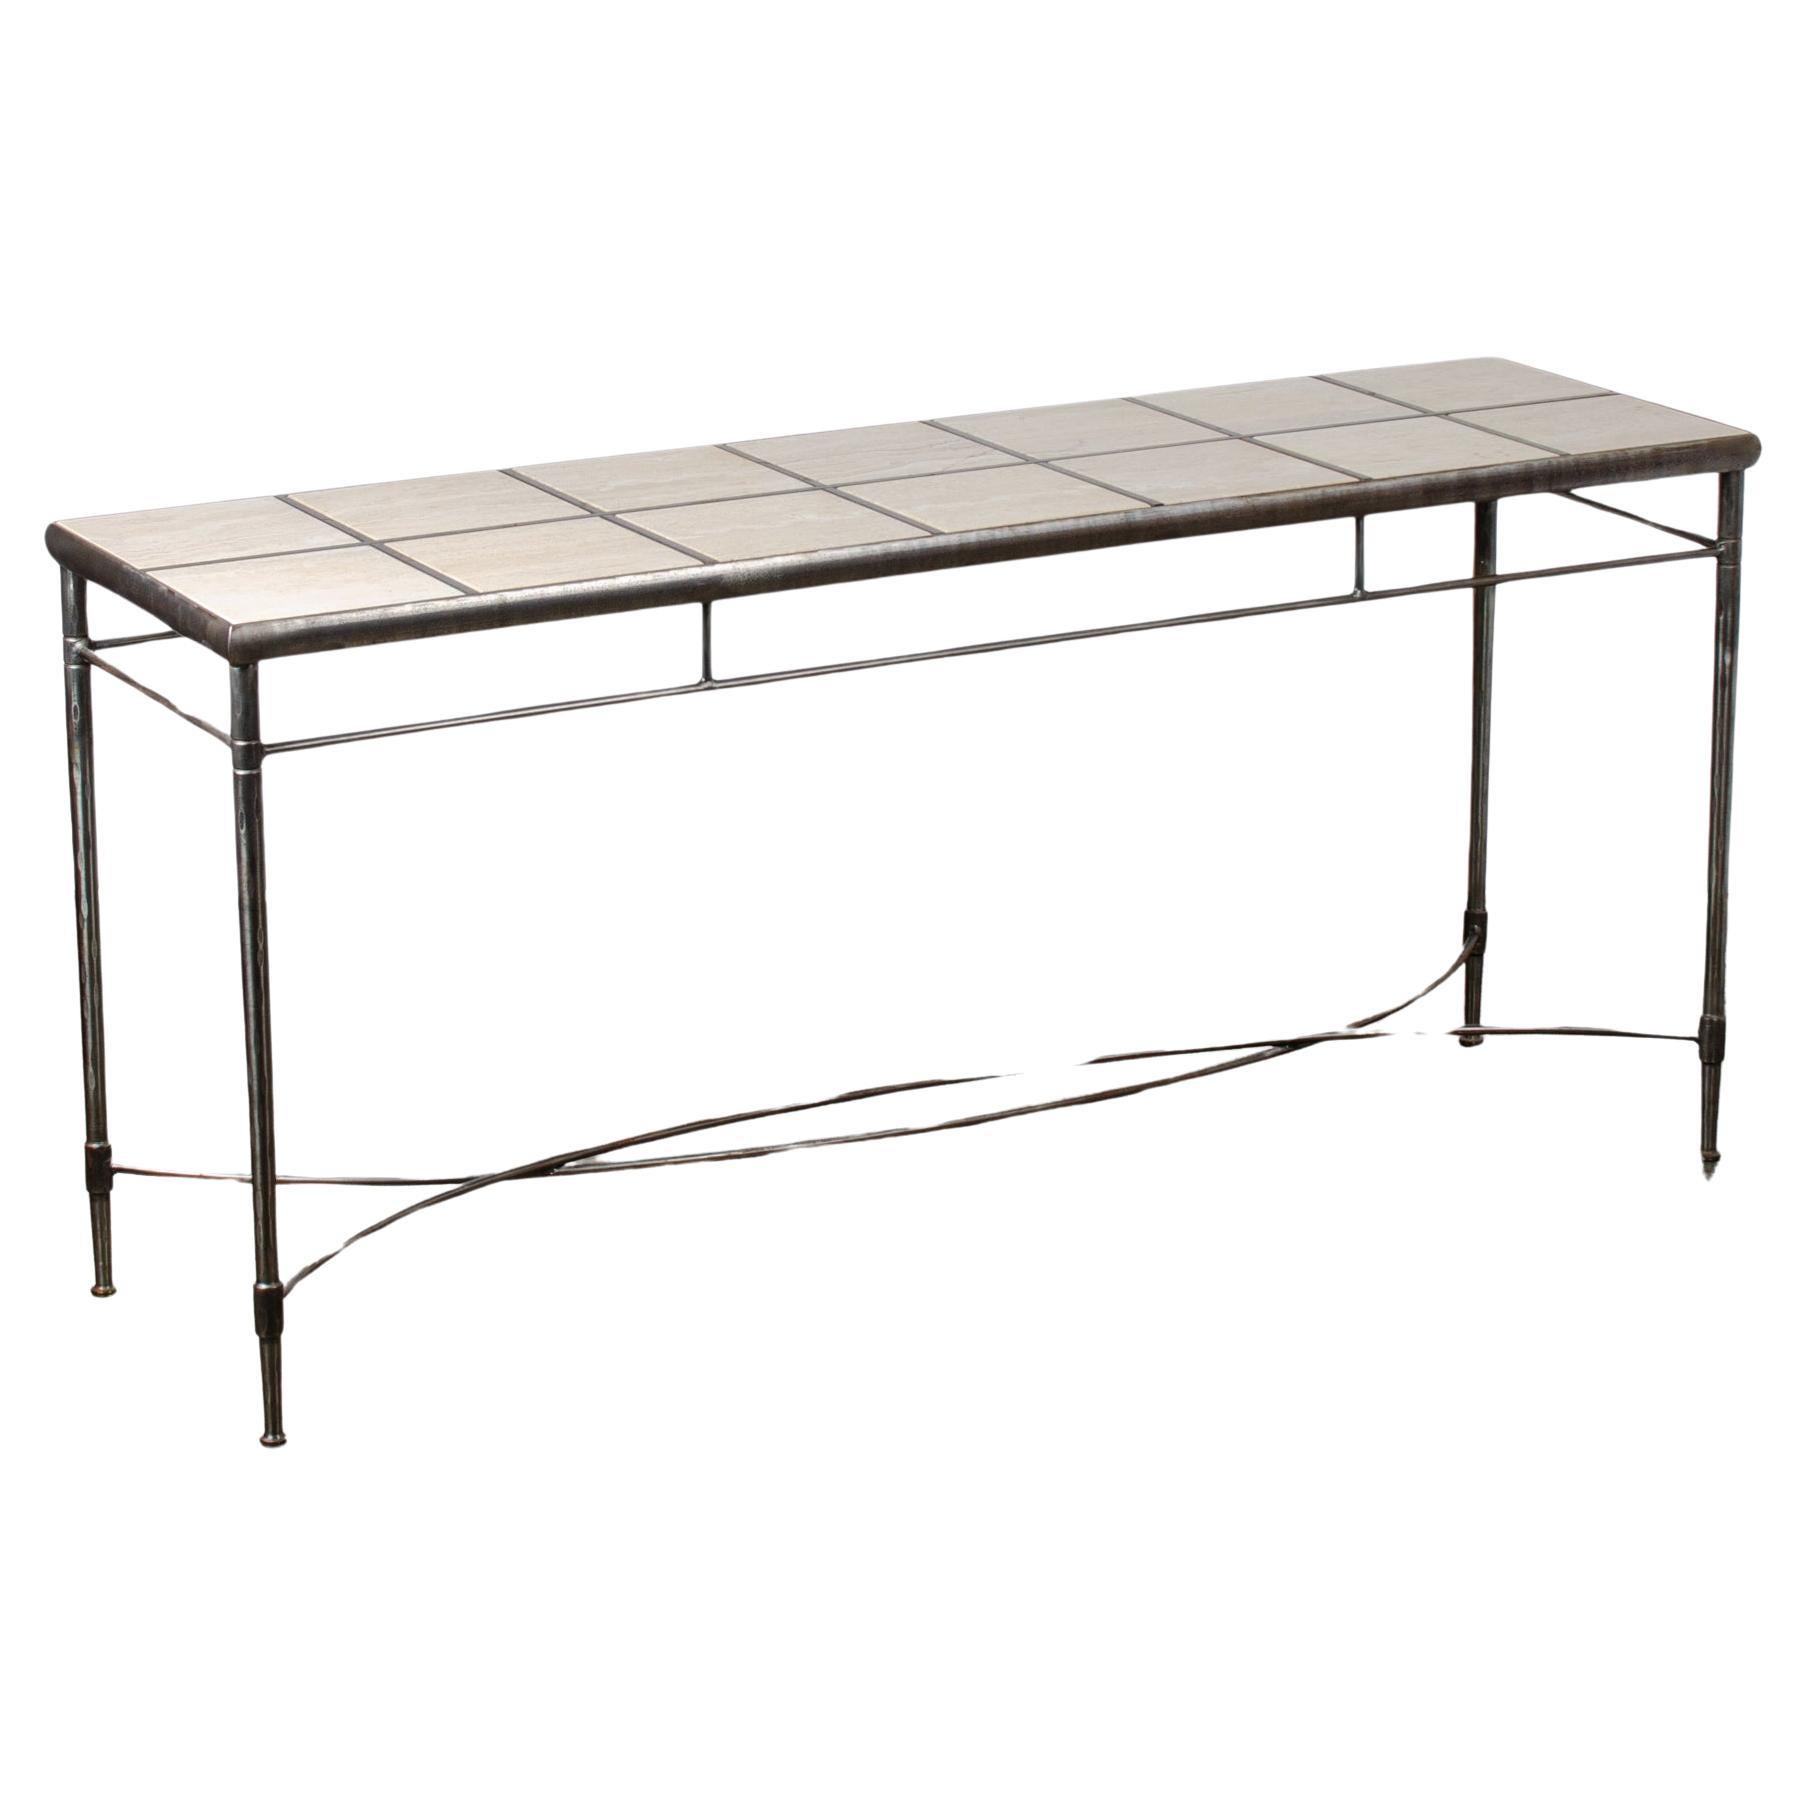 A hammered and polished iron and travertine tile top console table made in Italy circa the 1980s. 

Fourteen thick ¾ inch travertine tiles drop into recesses atop a hand-hammered and polished iron frame.  Stamped “Made Italy” on the curved stretcher